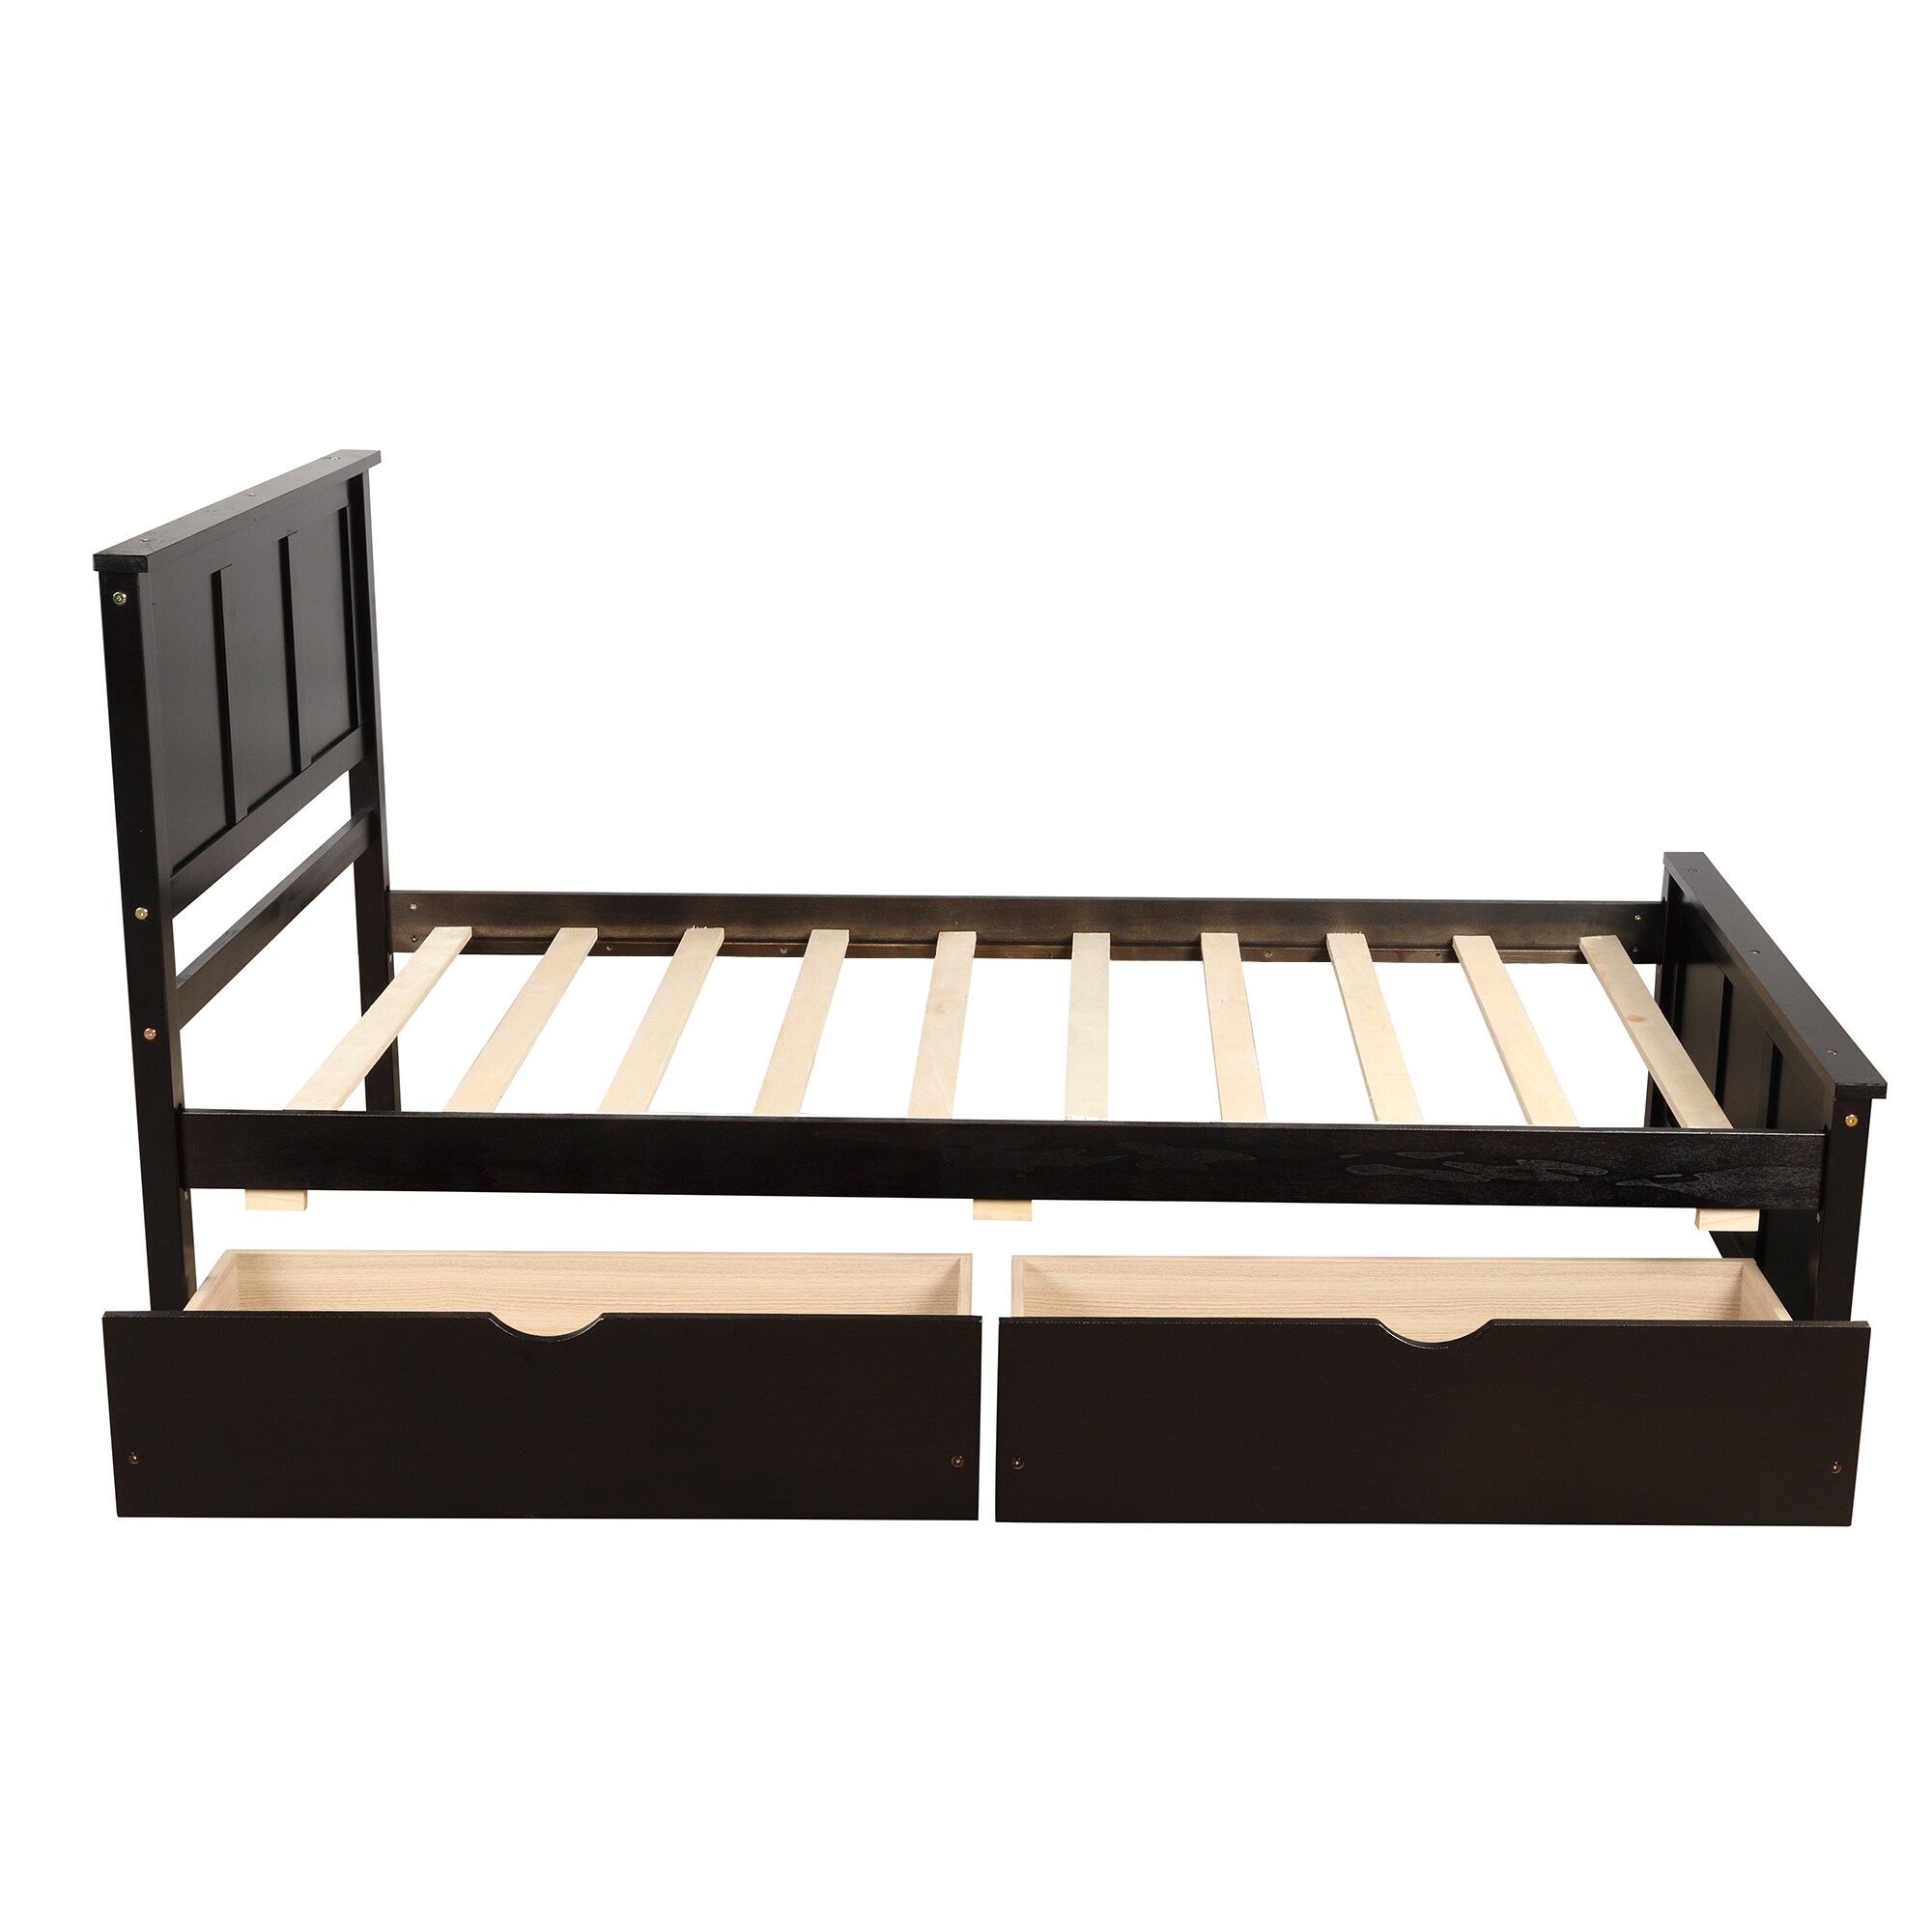 Platform Storage Bed, 2 drawers with wheels, Twin Size Frame